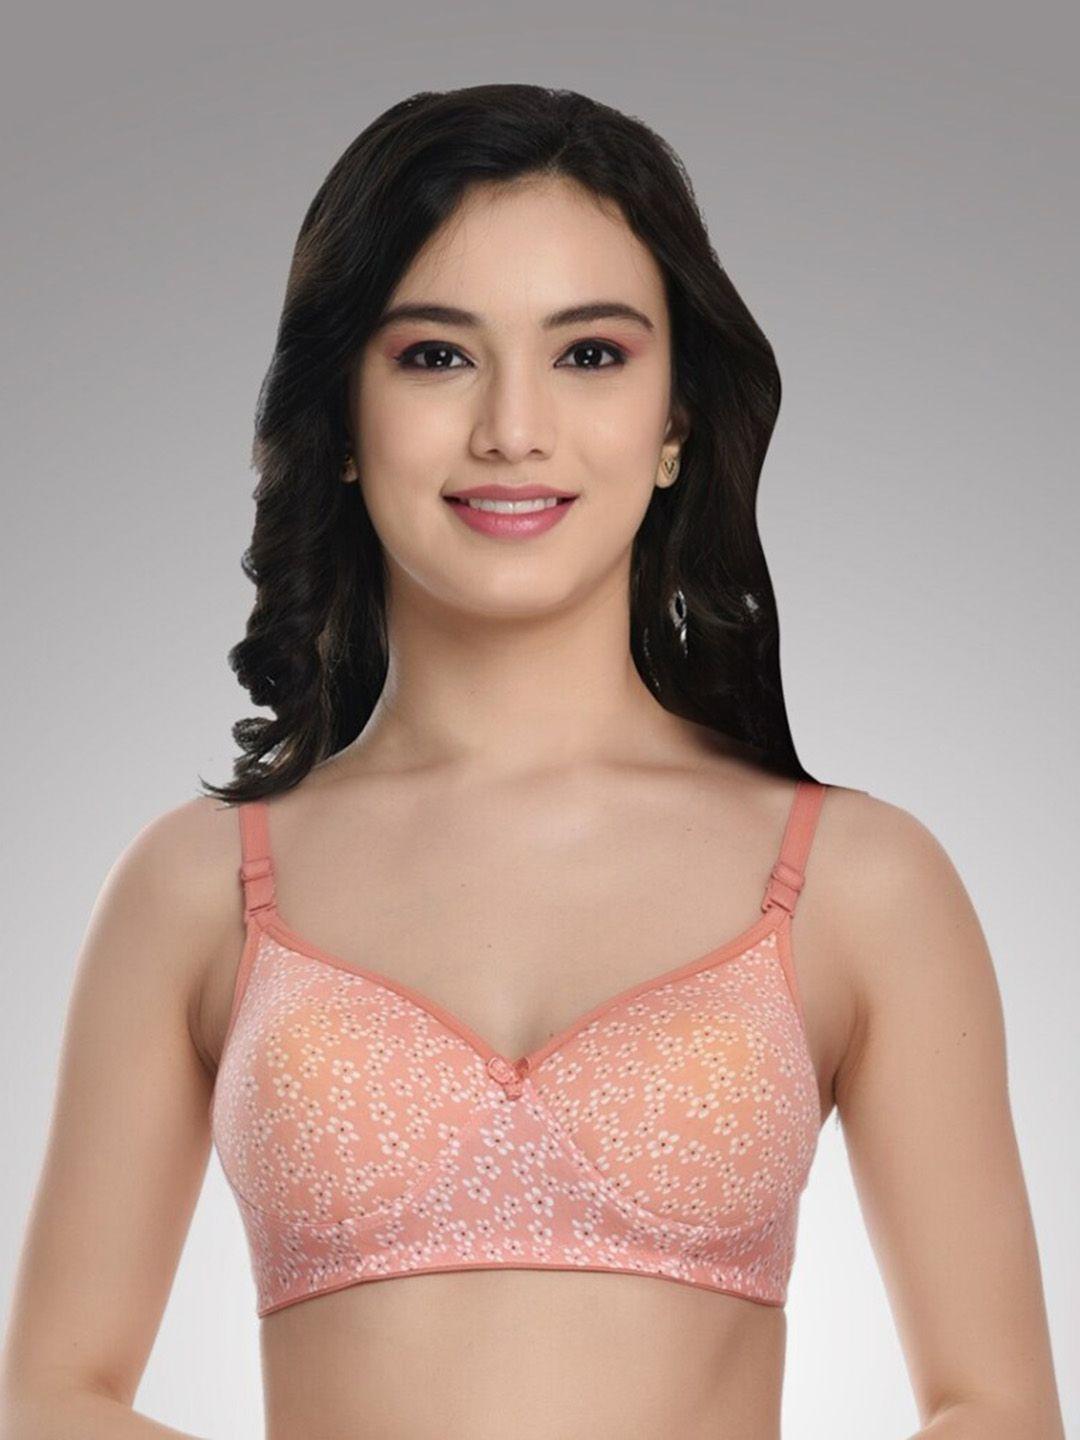 funahme floral everyday bra non-wired full coverage lightly padded